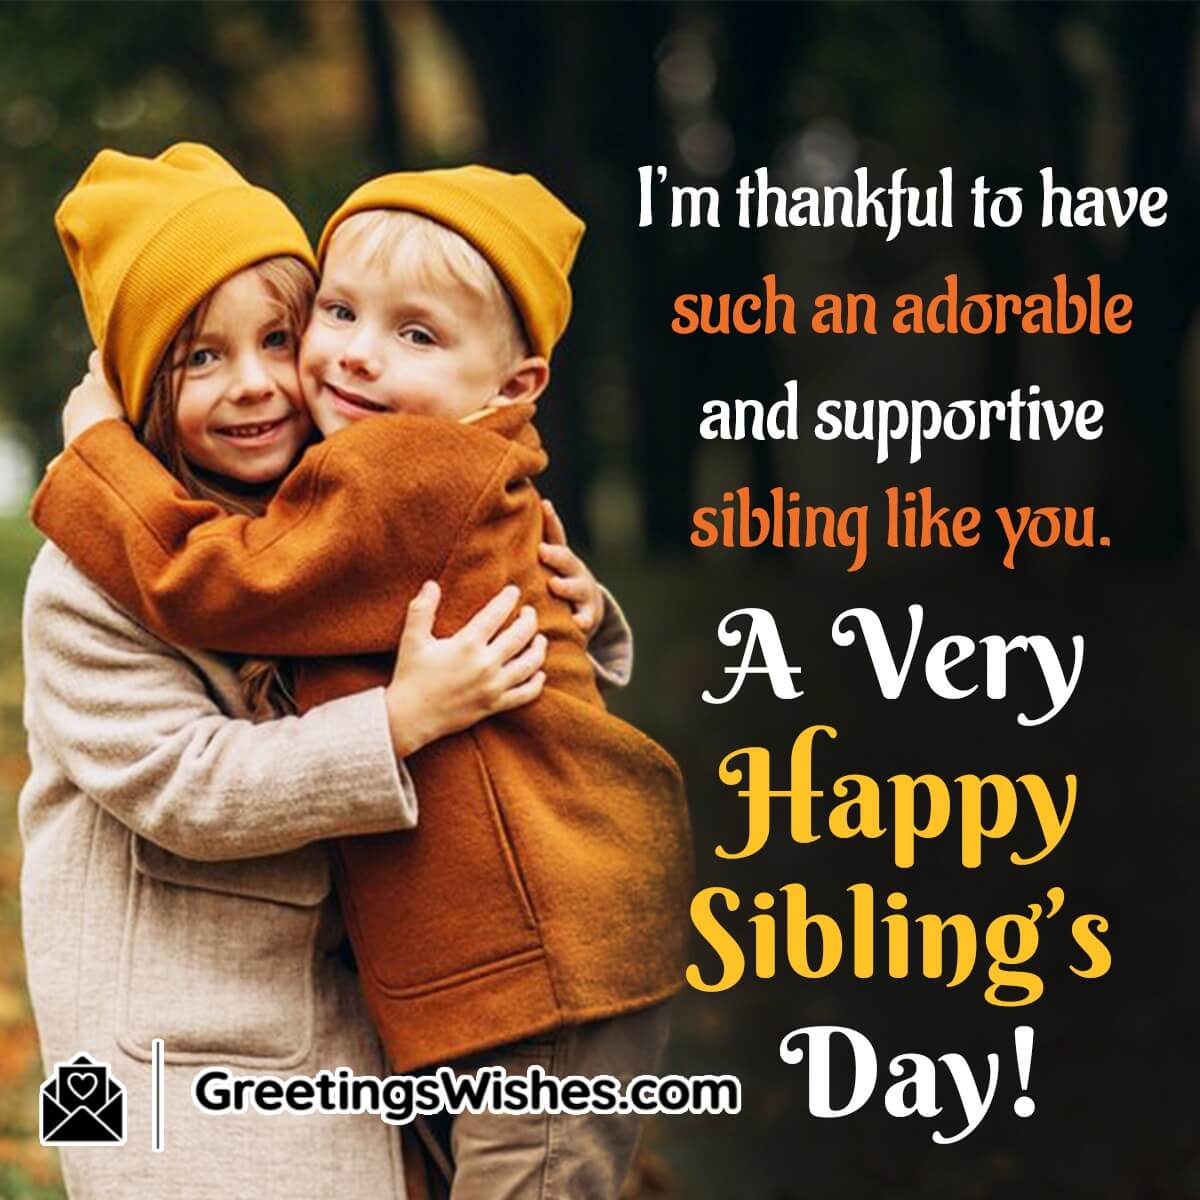 Siblings Day Wishes, Messages